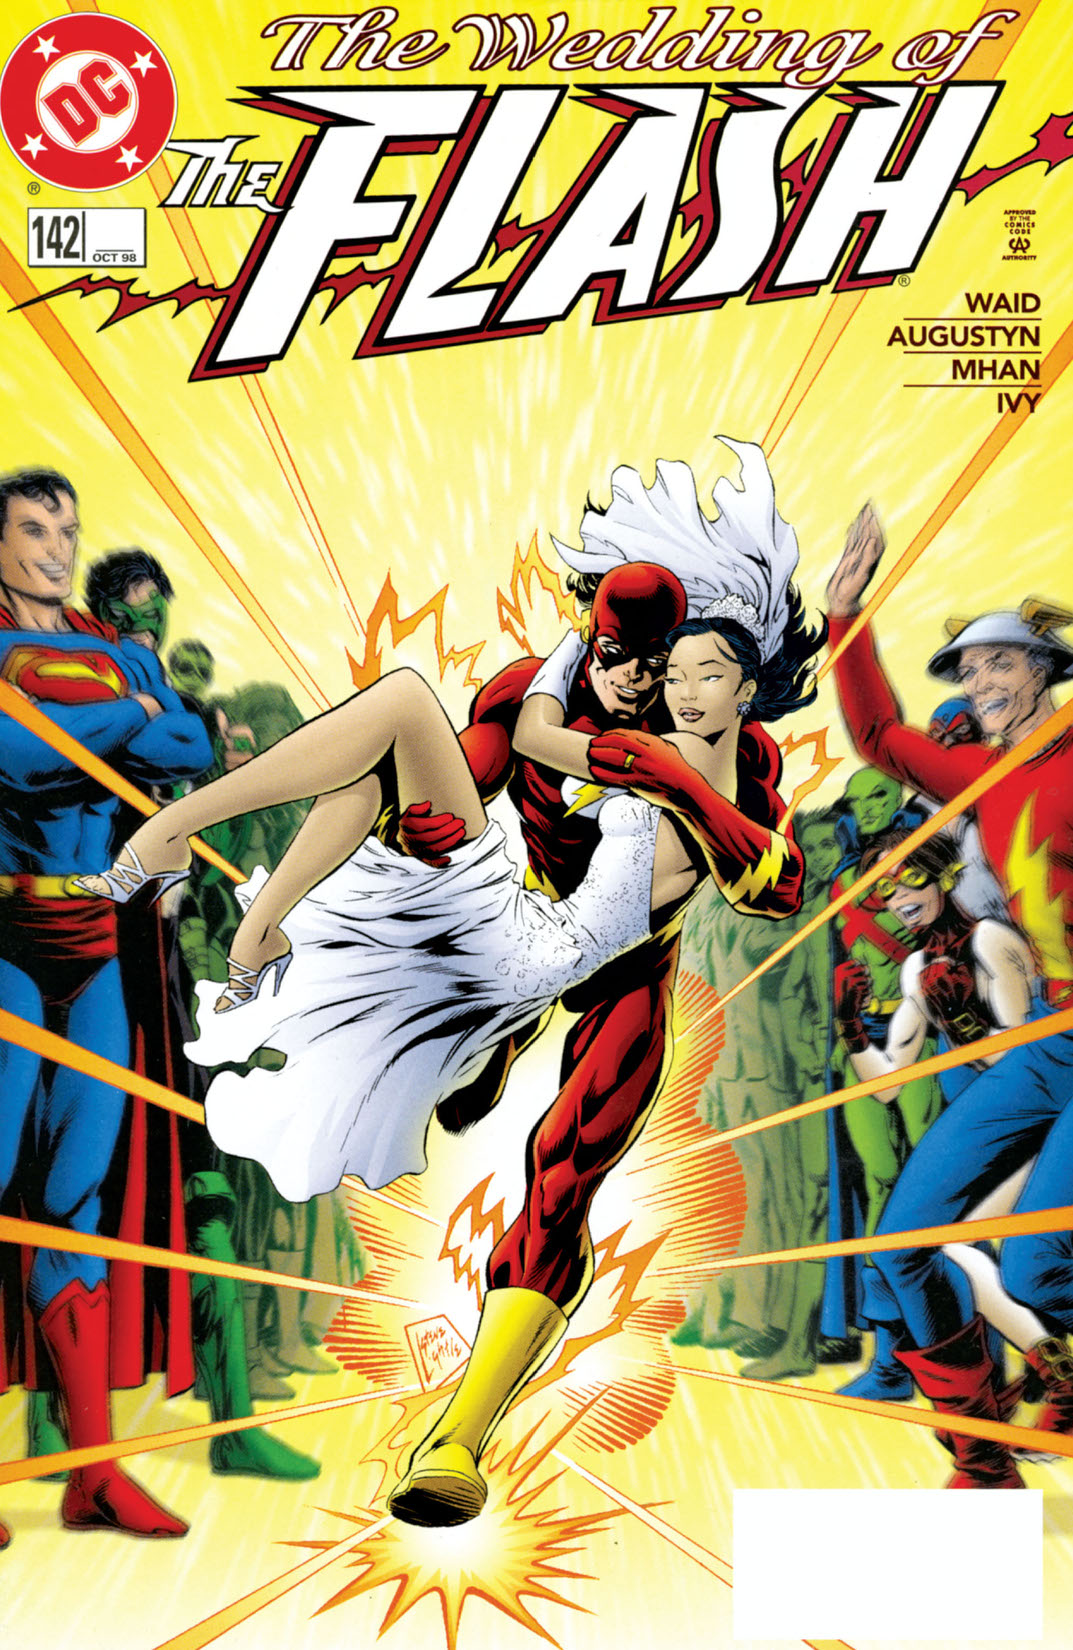 The Flash (1987-) #142 preview images